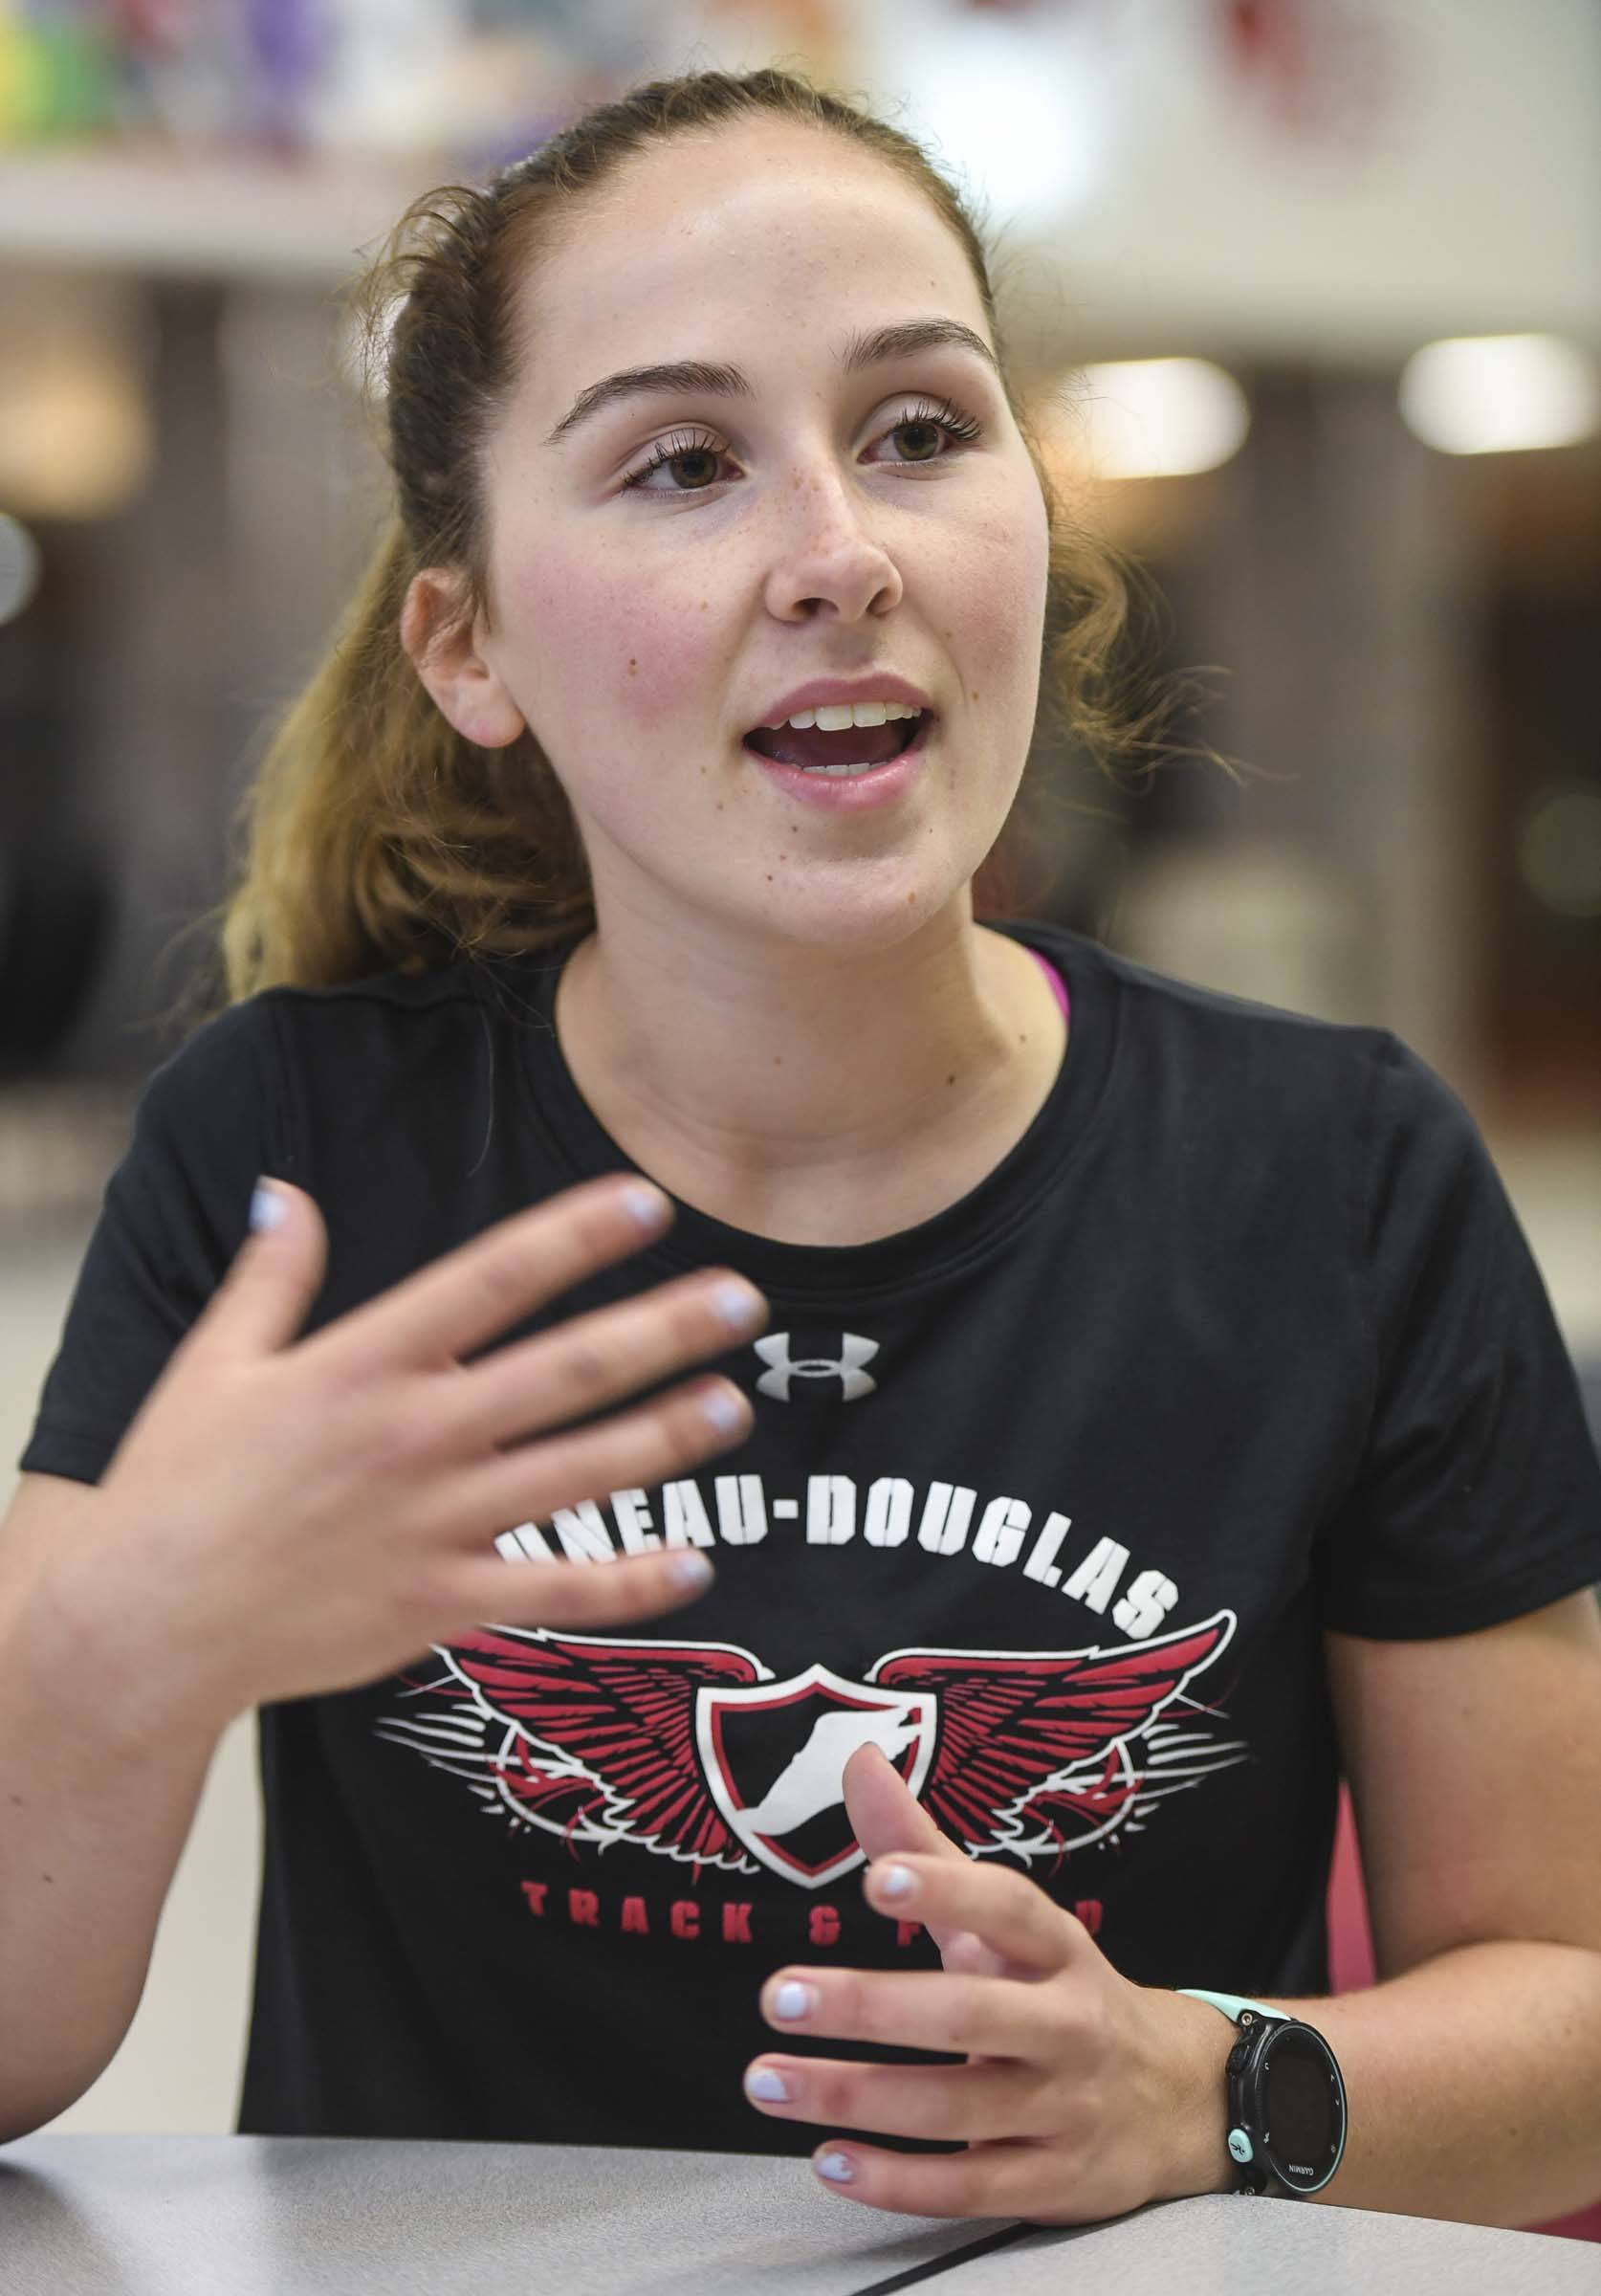 Katie McKenna, a senior at Juneau-Douglas High School:Yadaat.at Kalé, talks about her competitive running and social justice interests during an interview at JDHS on Thursday, Aug. 22, 2019. (Michael Penn | Juneau Empire)